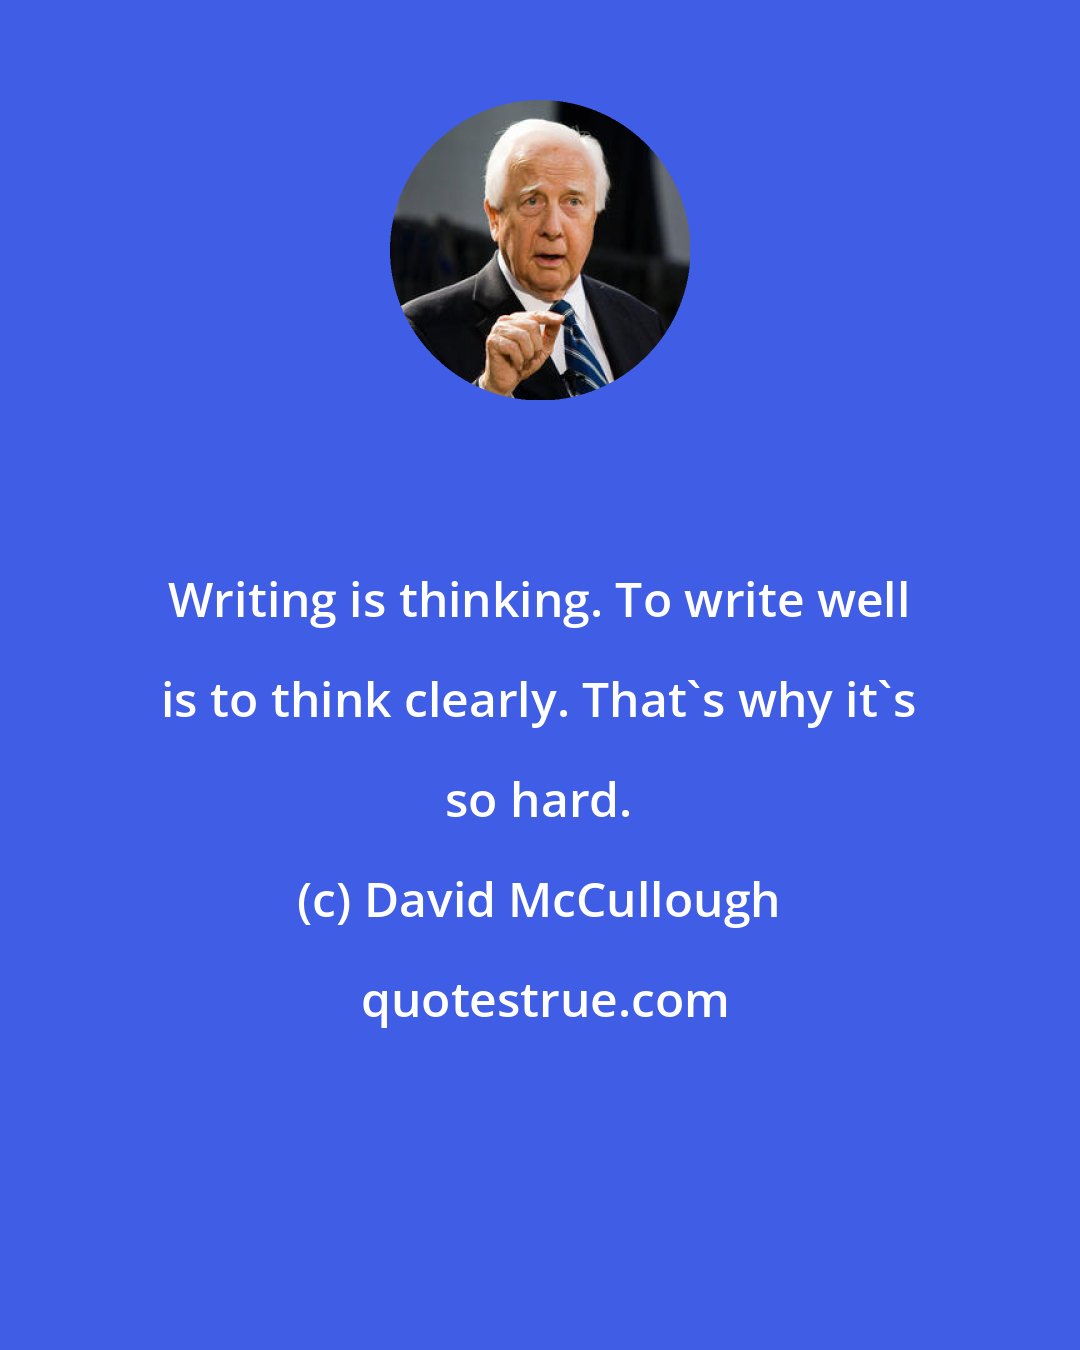 David McCullough: Writing is thinking. To write well is to think clearly. That's why it's so hard.